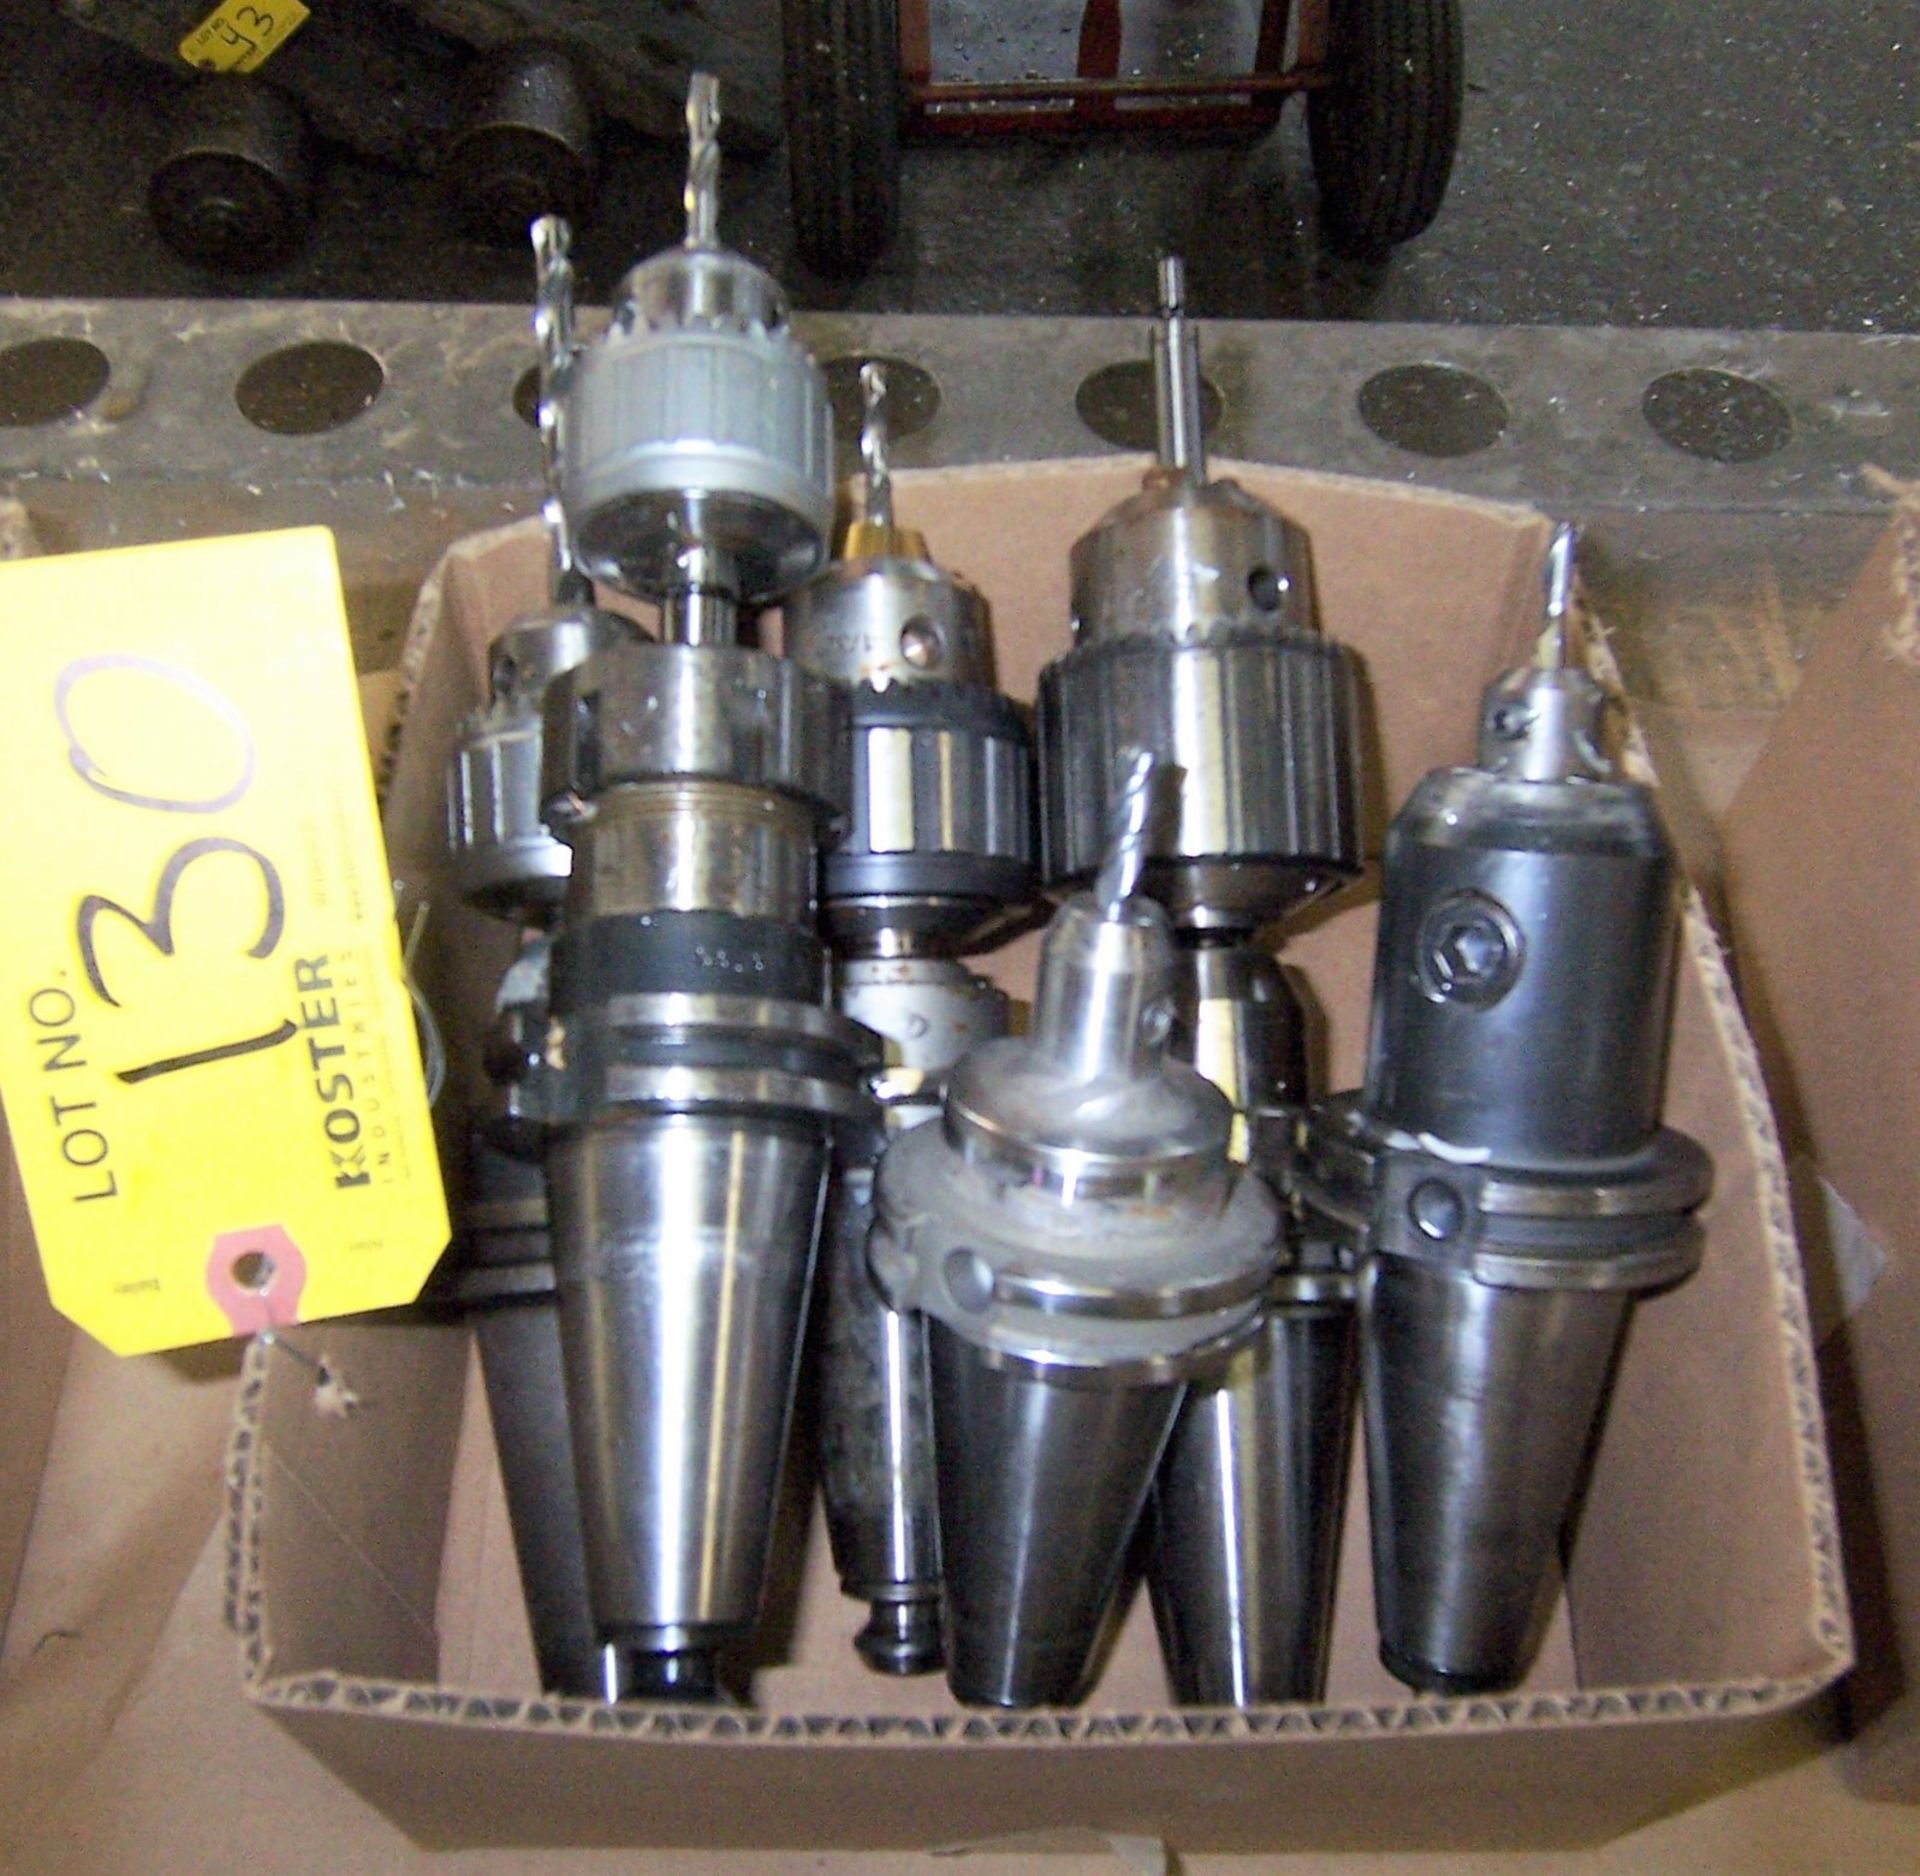 (6) ASSORTED #40 TAPER TOOL HOLDERS